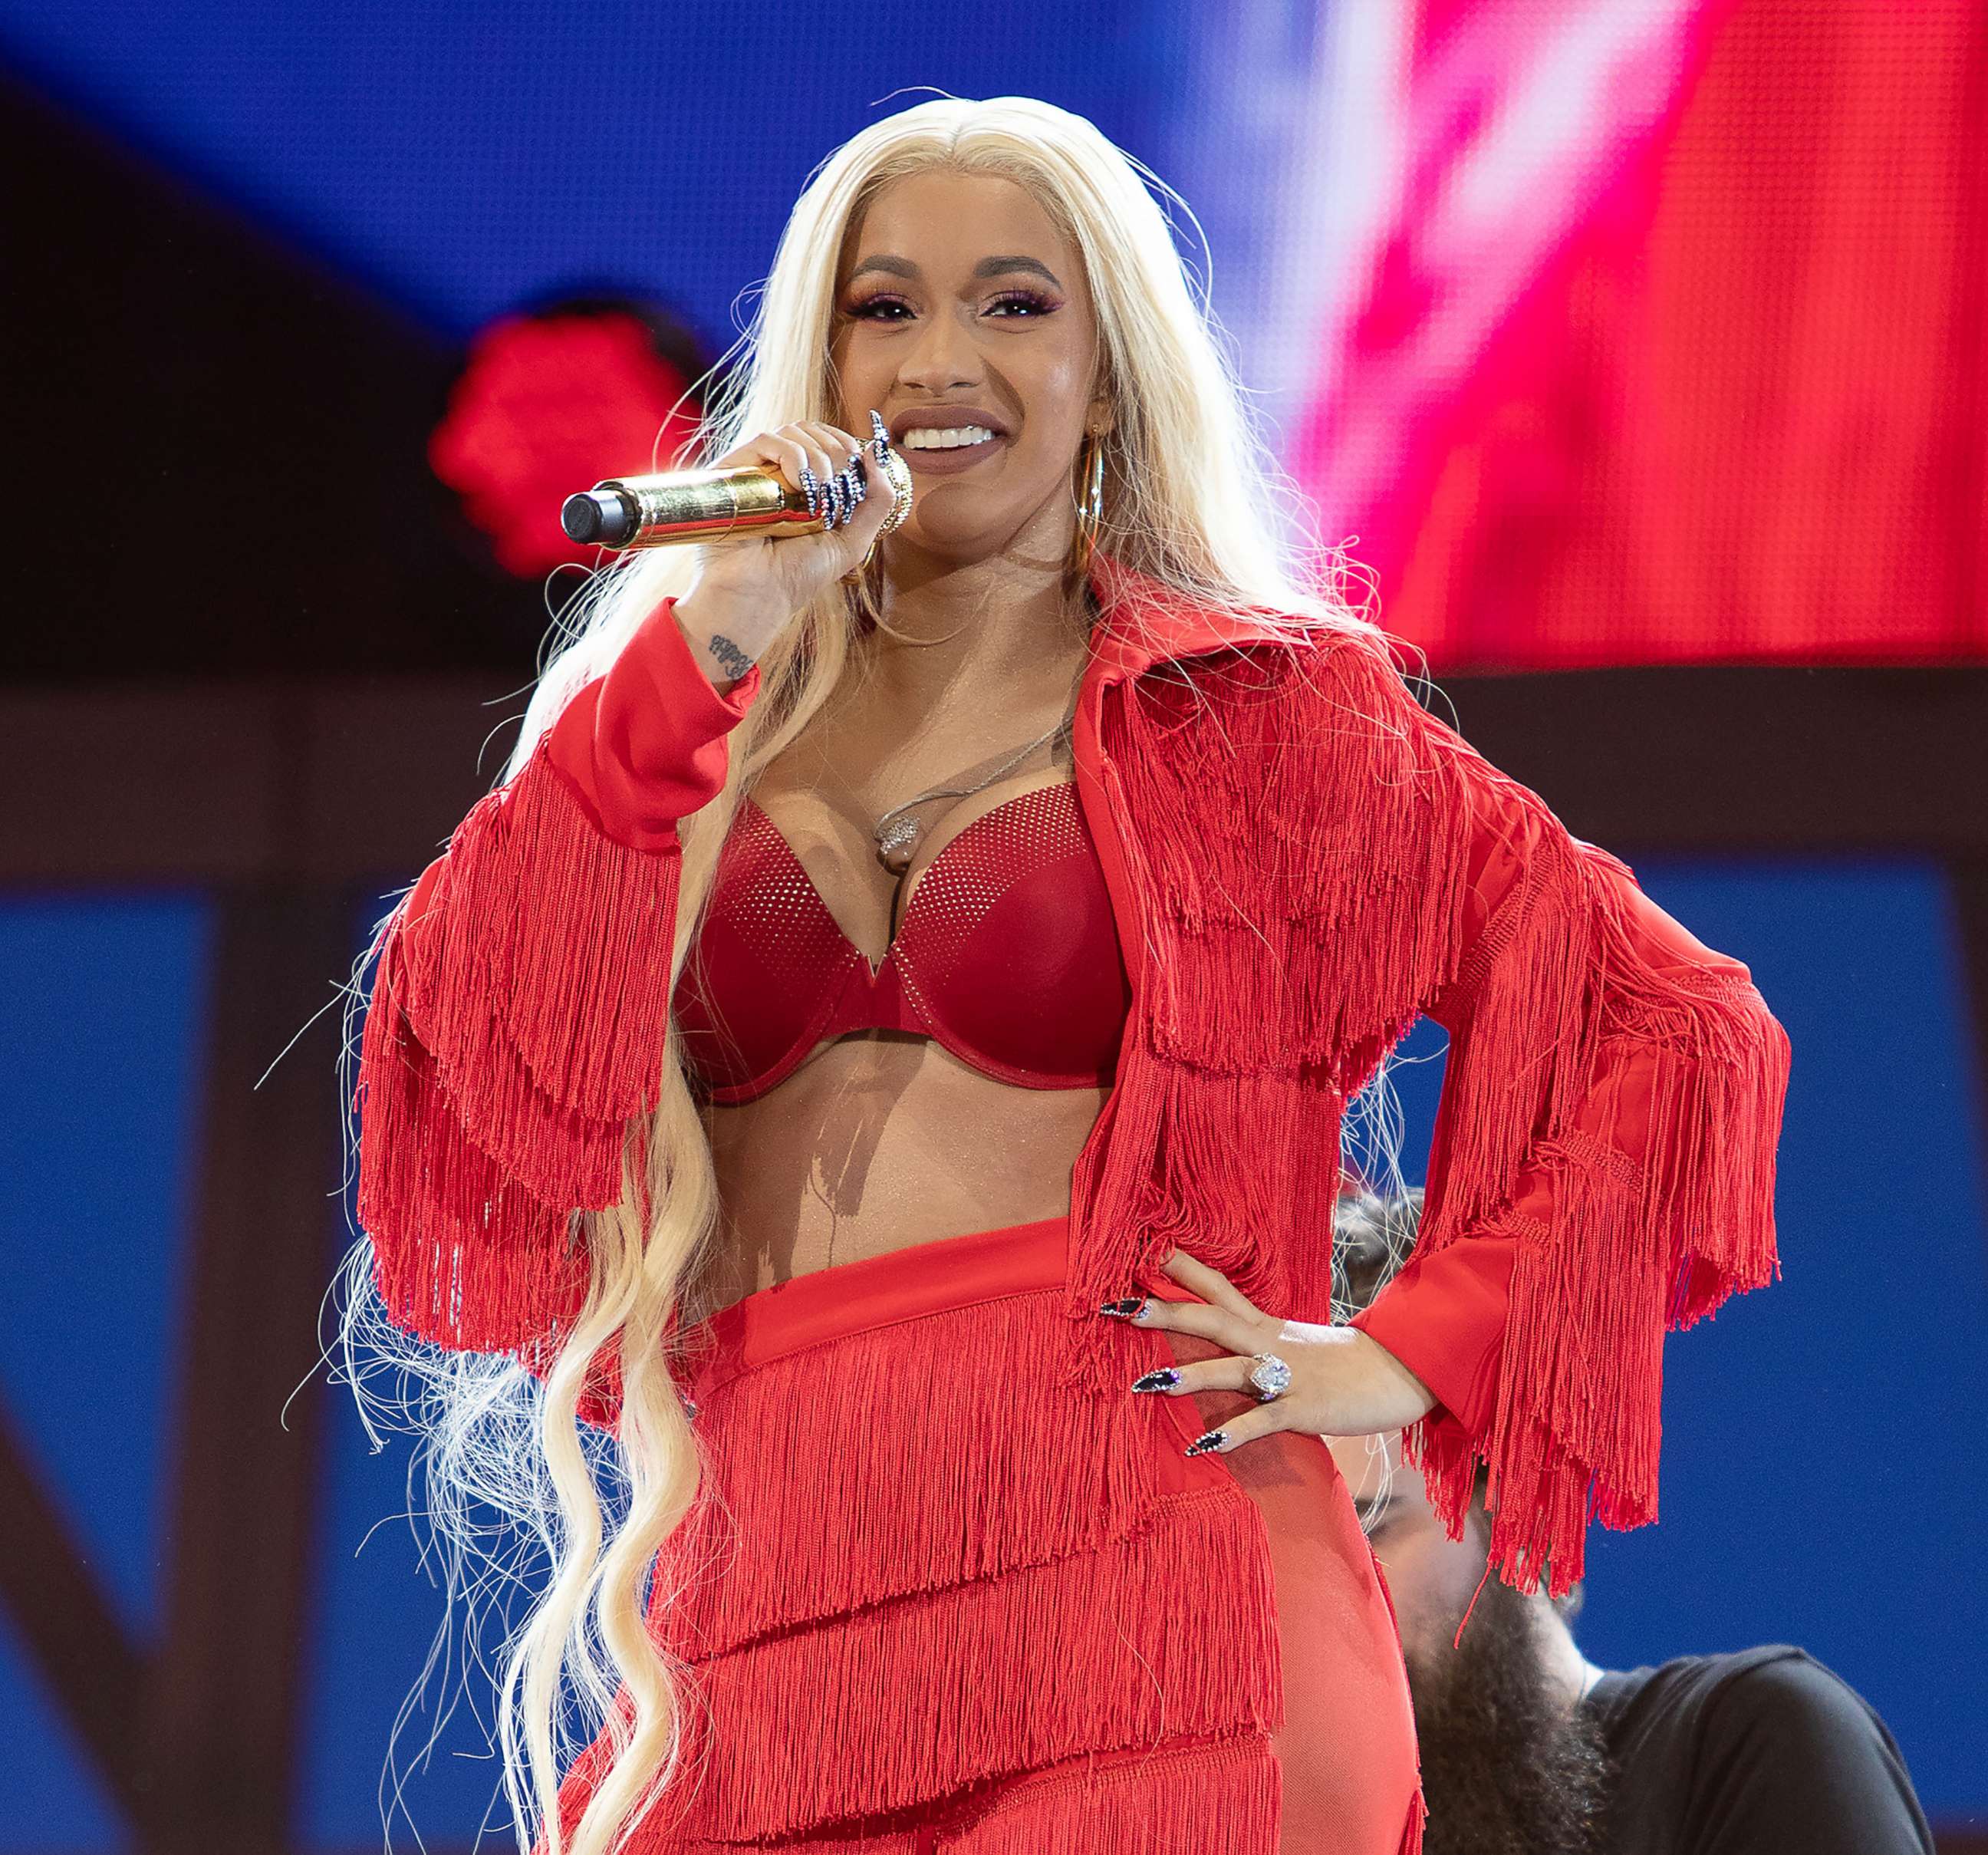 PHOTO: Cardi B performs onstage during the 2018 Global Citizen Festival: Be The Generation in Central Park on Sept. 29, 2018 in New York City.